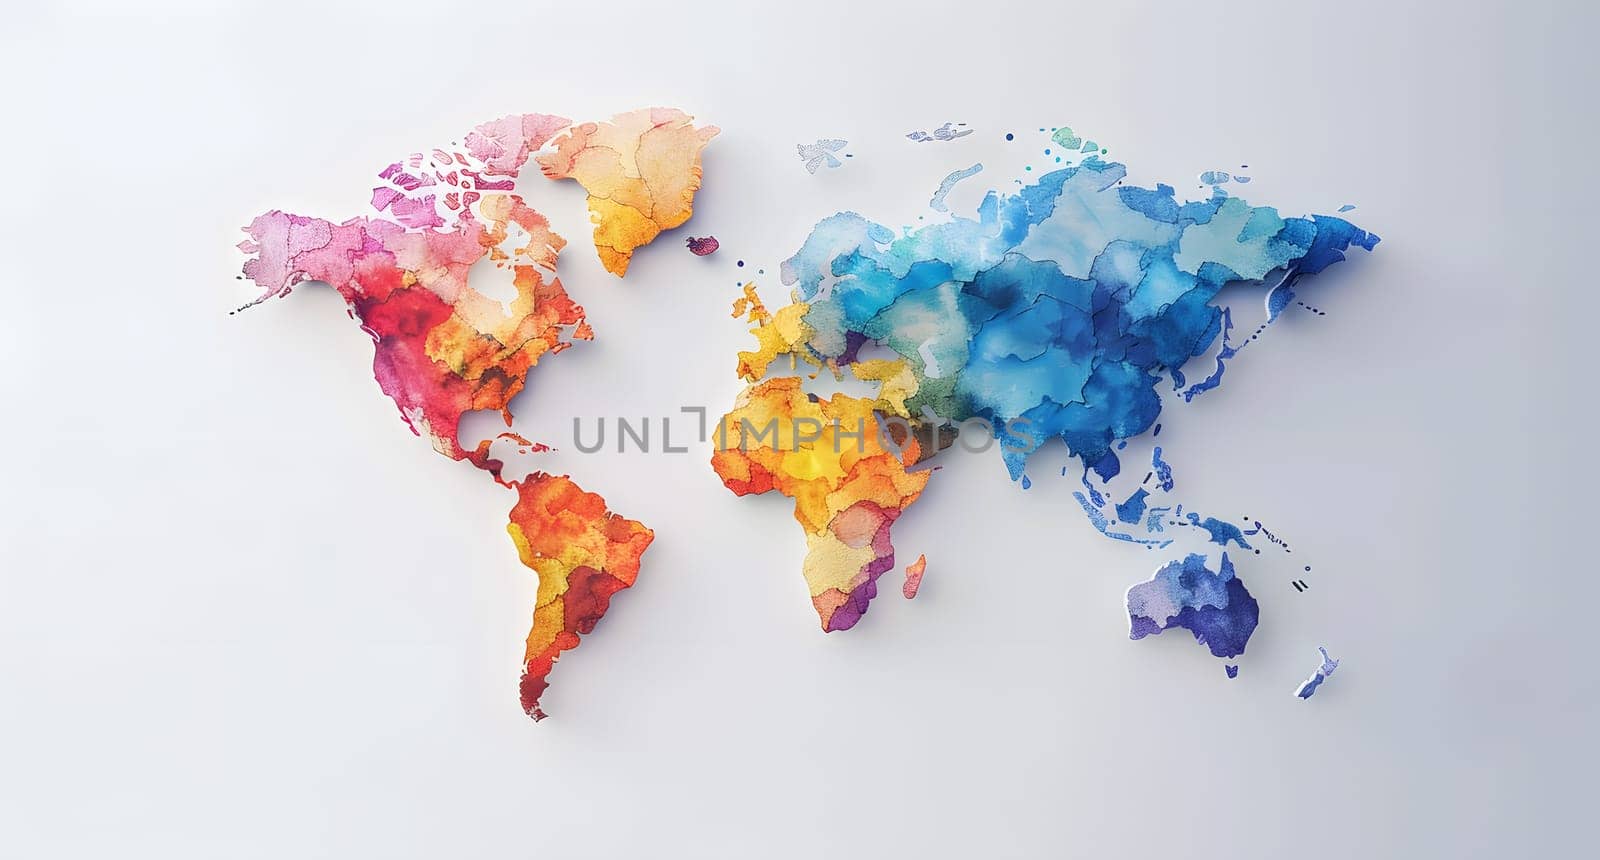 A vibrant electric blue map of the world is creatively painted on a natural white canvas. The font is stylish and the peach accents add a touch of art and fashion accessory to the visual arts event